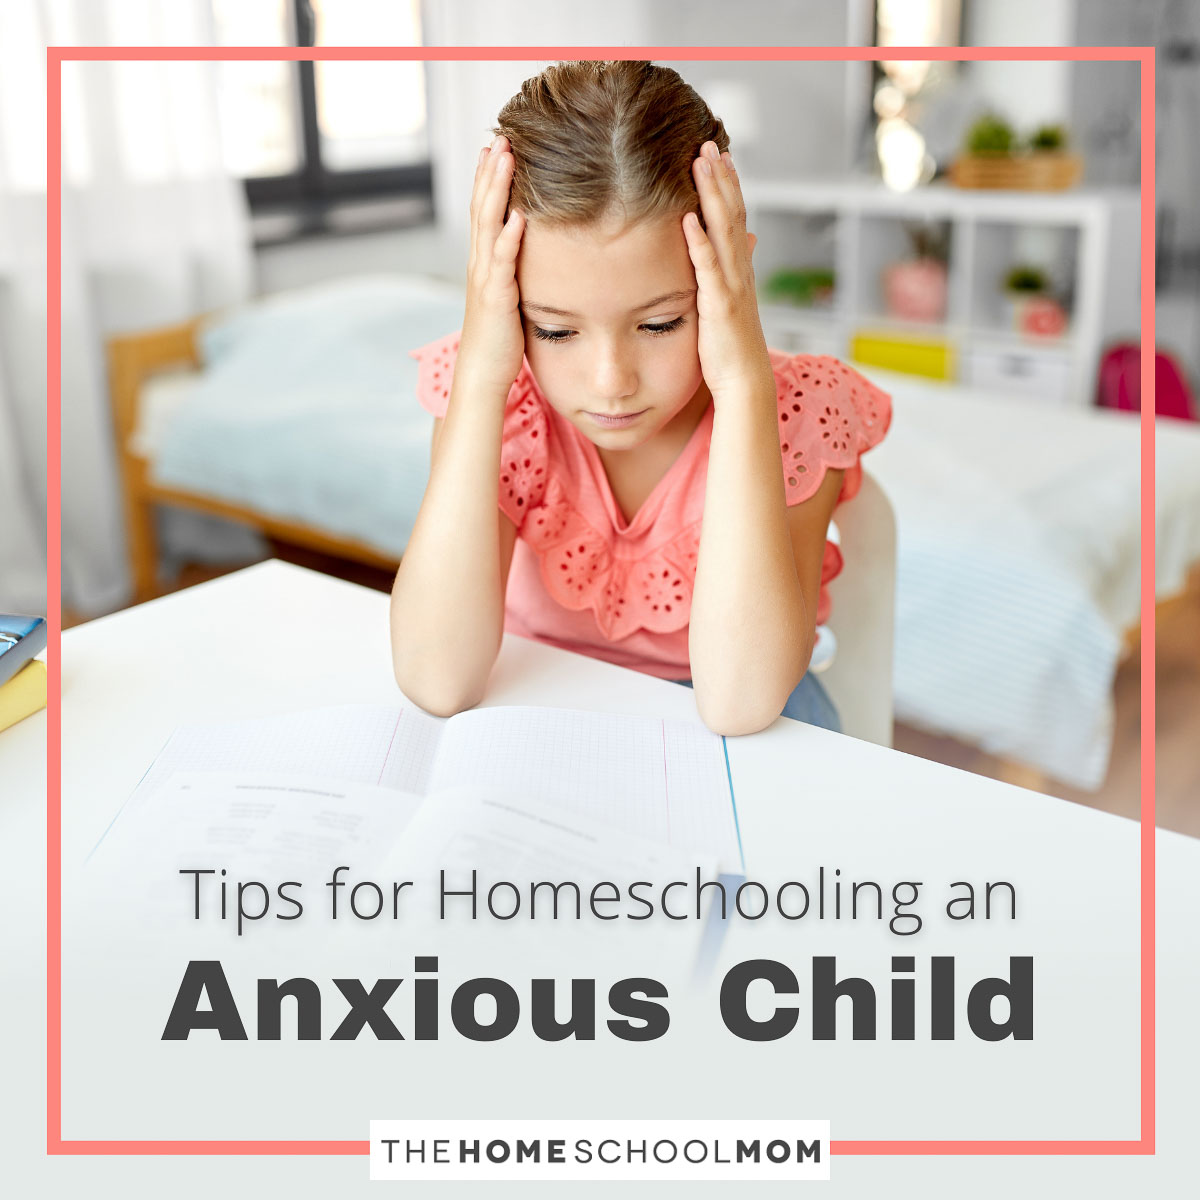 Tips for Homeschooling an Anxious Child